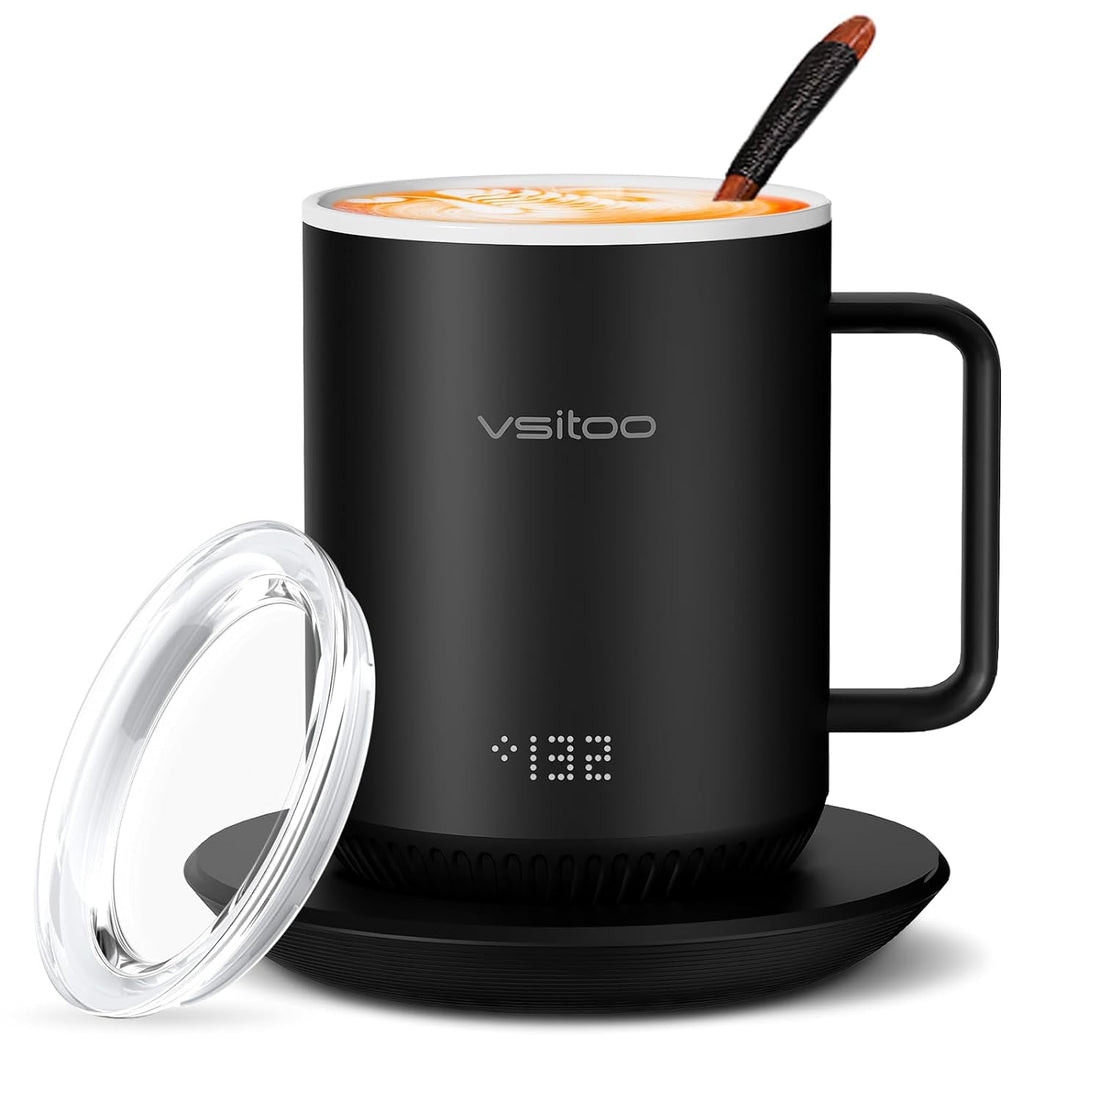 VSITOO S3 Temperature Control Smart Mug 2 with Lid, Self Heating Coffee Mug 10 oz, Touch Tech&LED Display, White, 1.5-hr Battery Life - App Controlled Heated Coffee Mug - Improved Design, Coffee Gifts